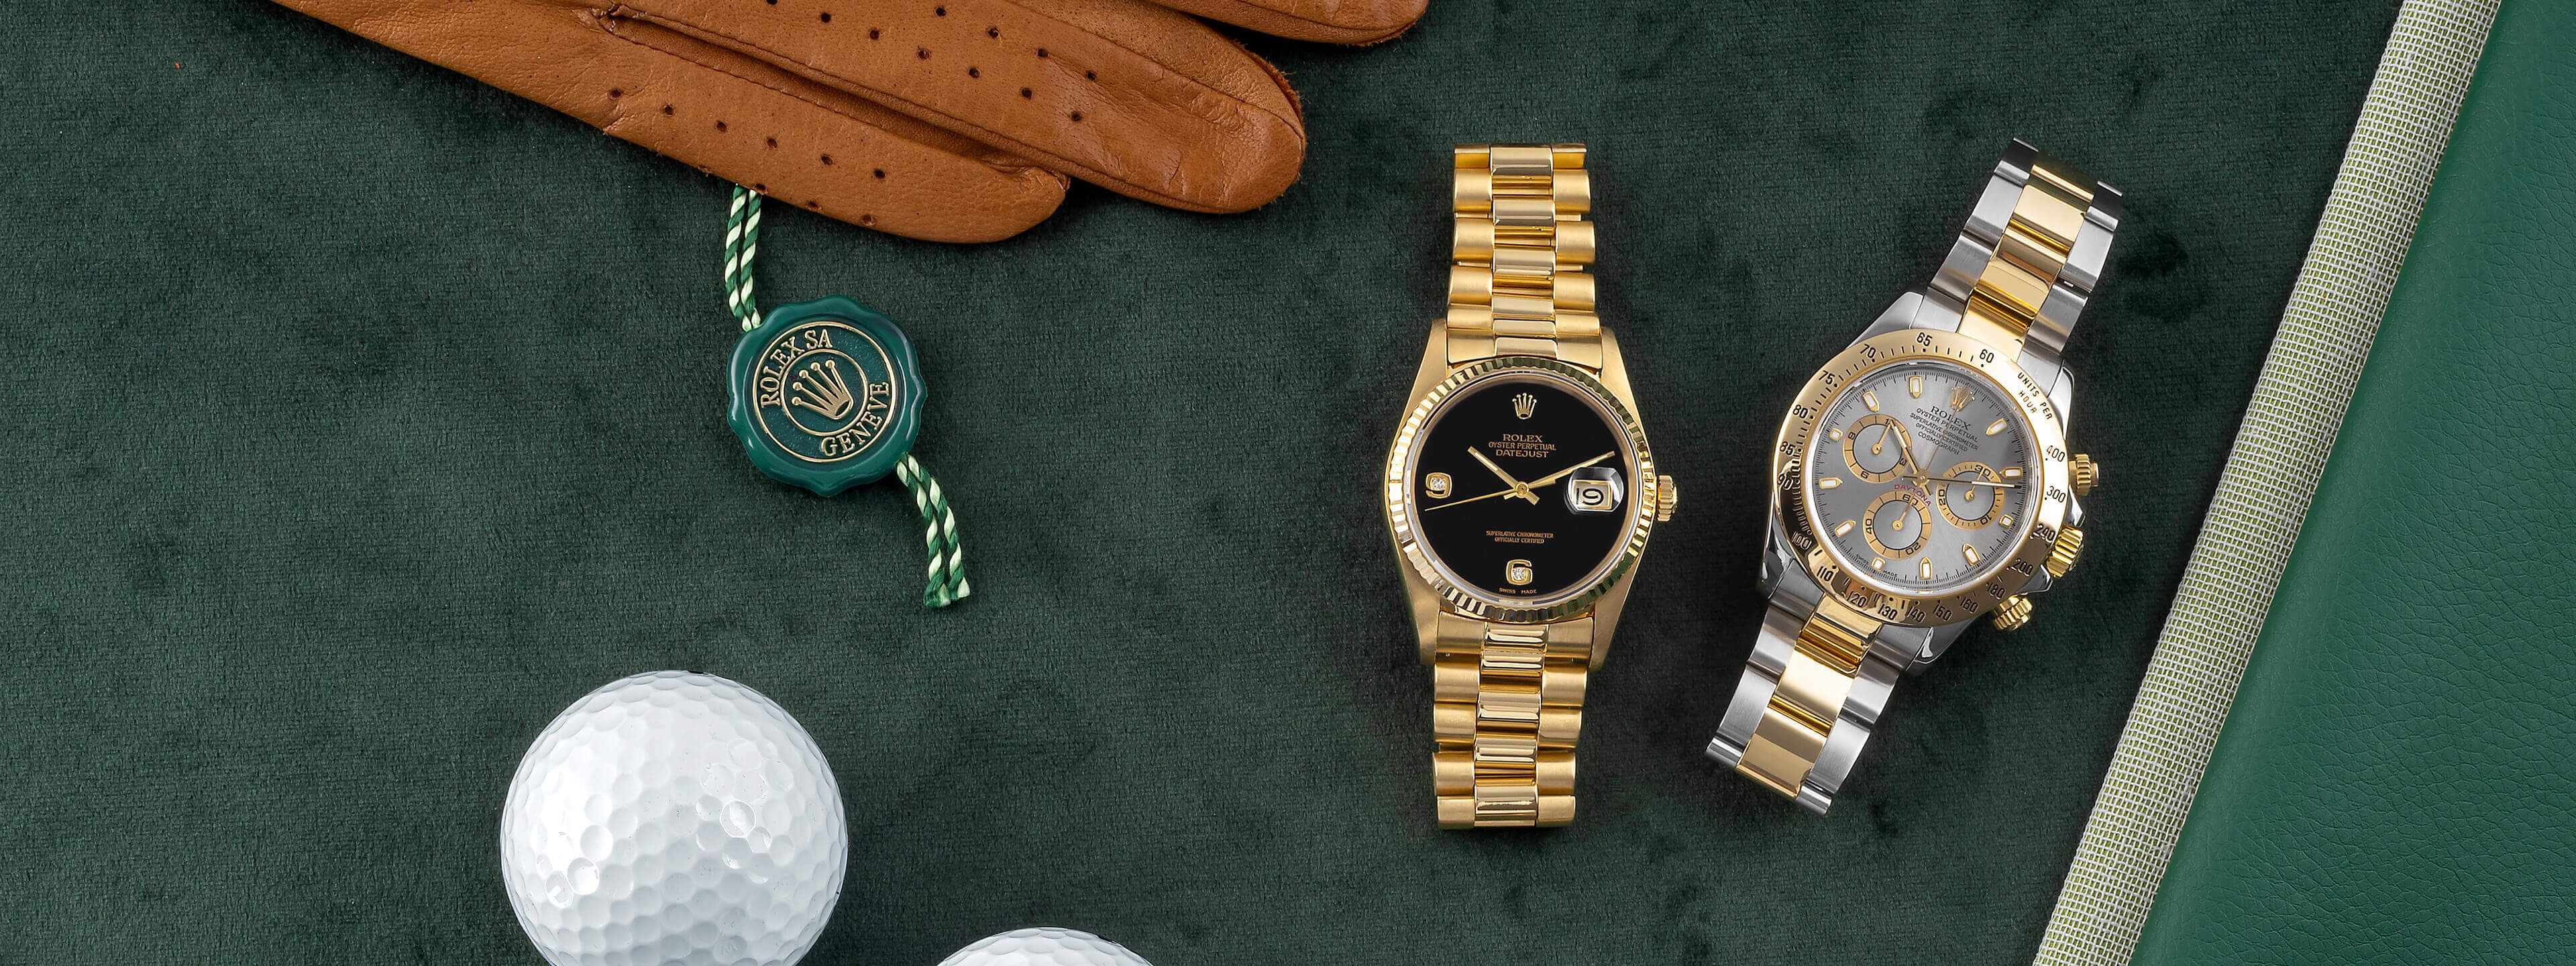 pre-owned ROLEX watches | buy a used watch